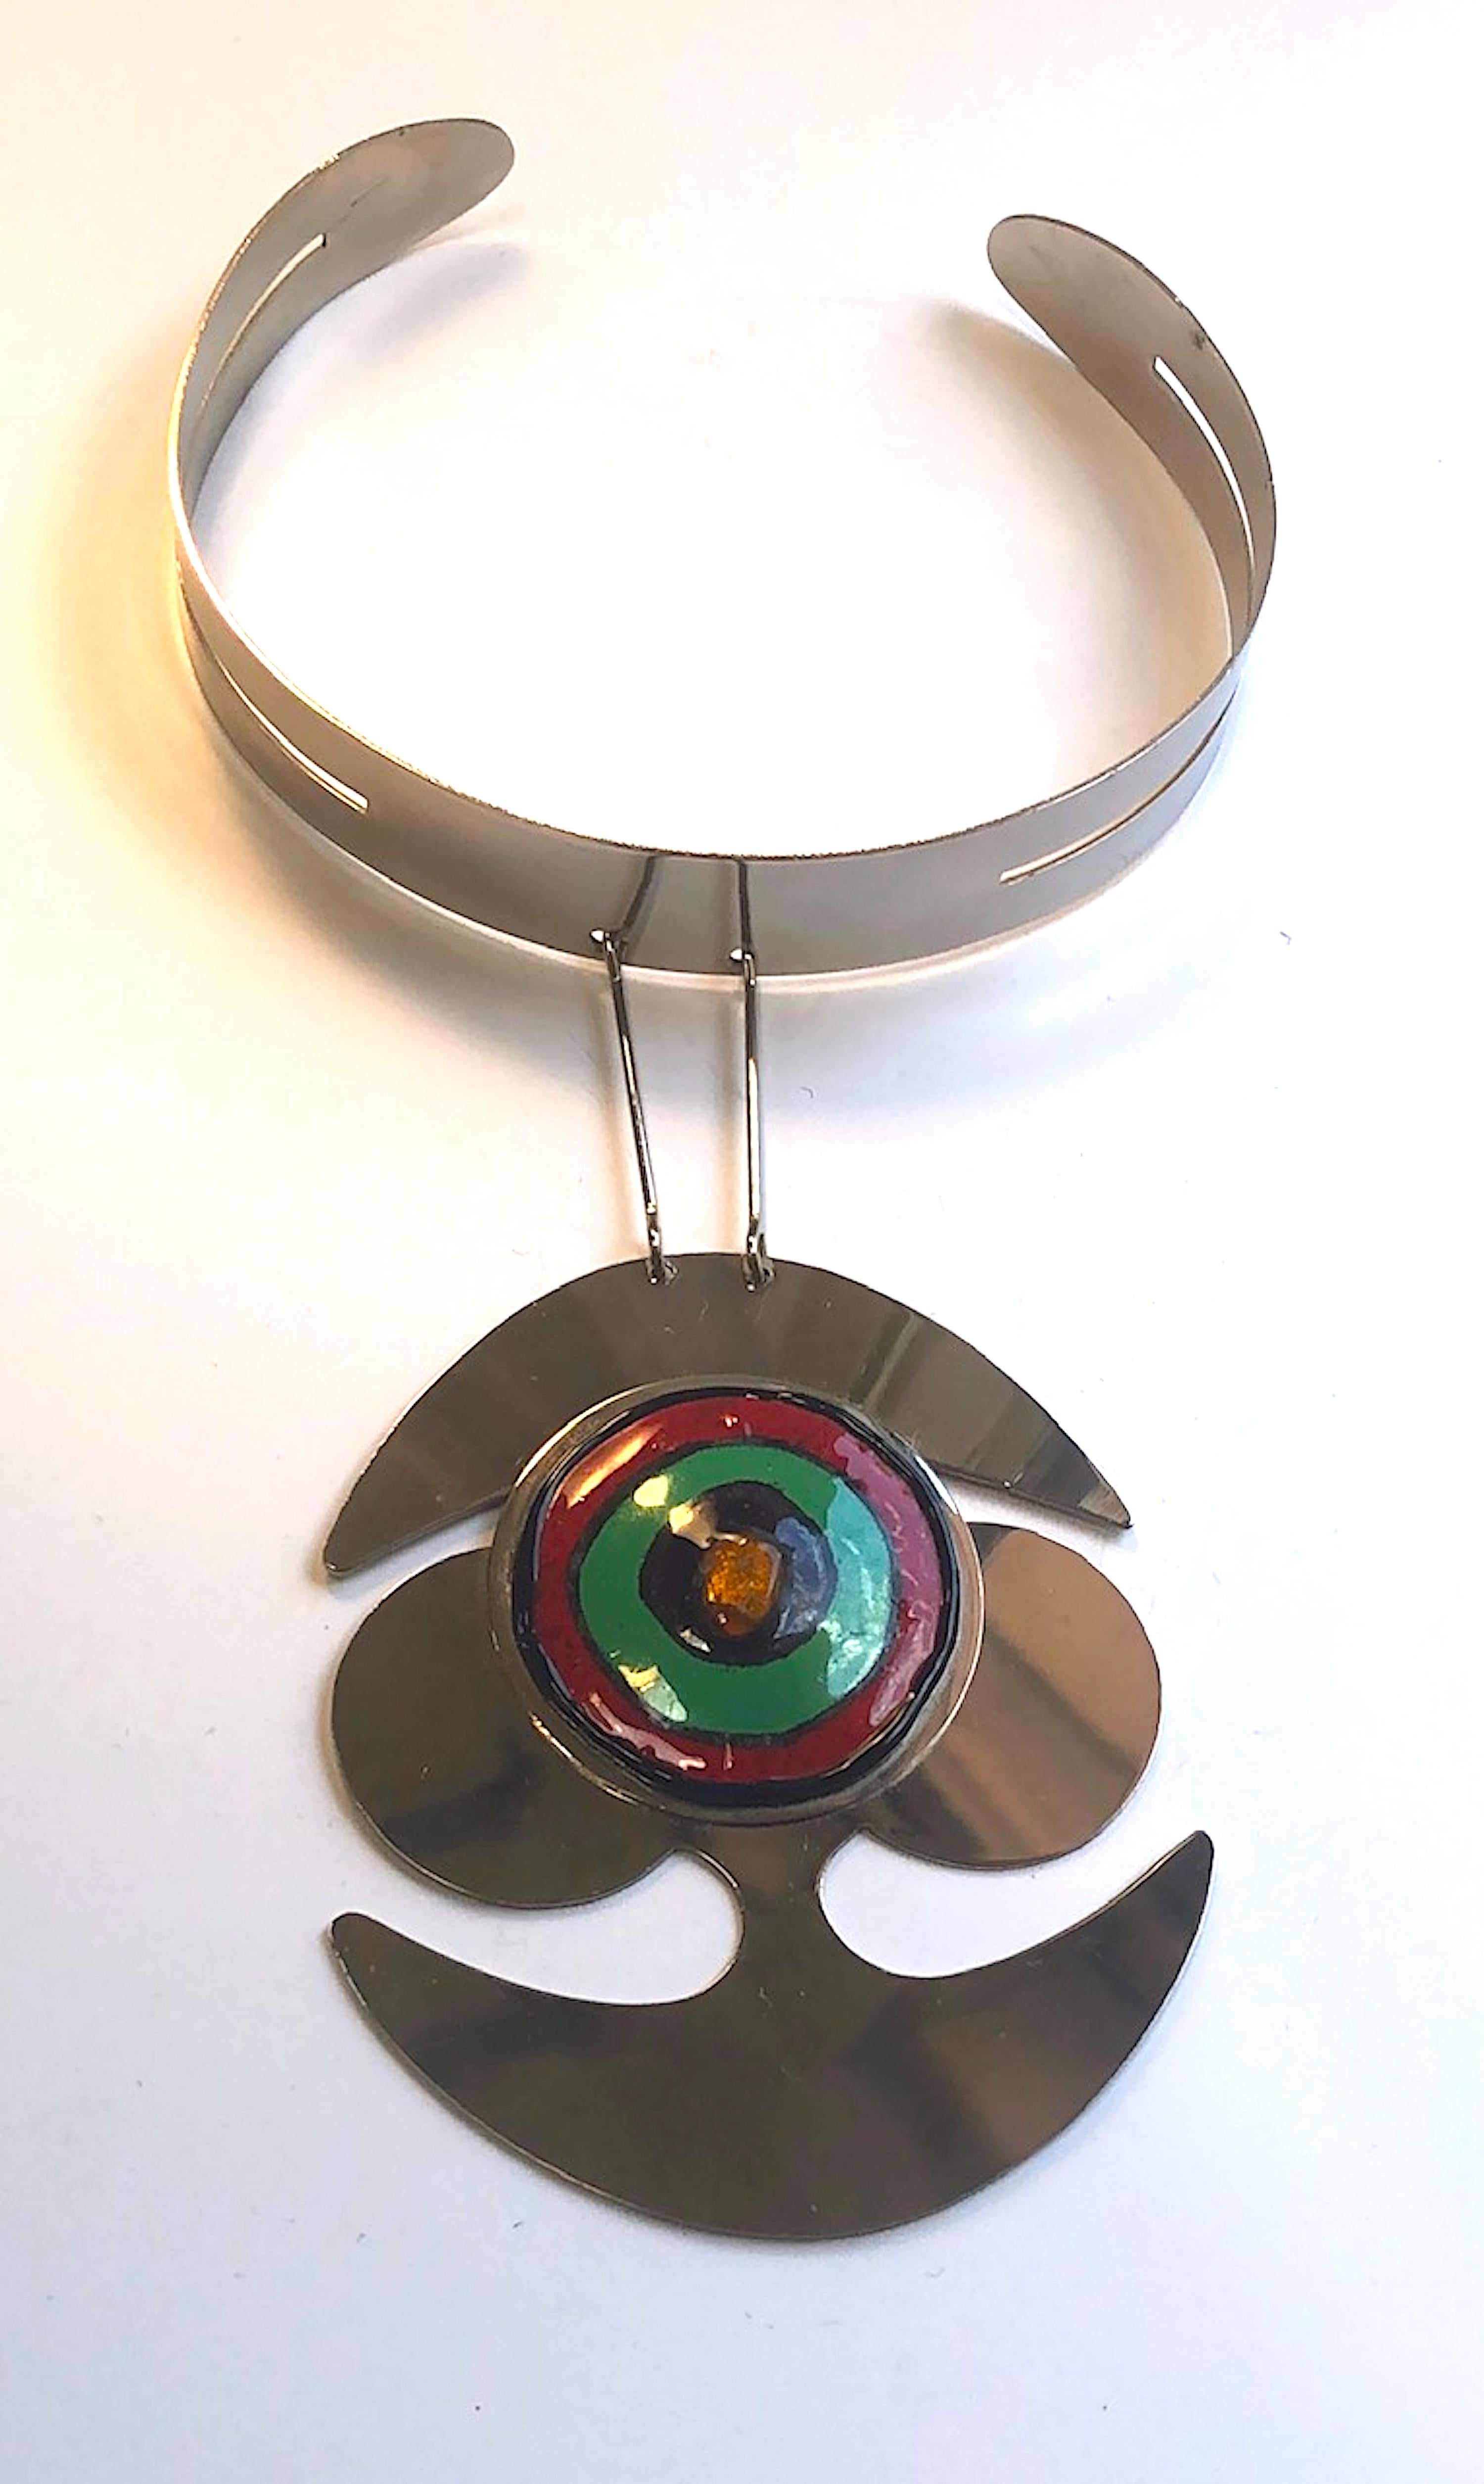 A rare and excellent example of a hand made Pierre Cardin 1960s space age collection necklace. Cardin's space age collection was a history making turning point in fashion with lasting effects to today. Along with his space age clothes, he created